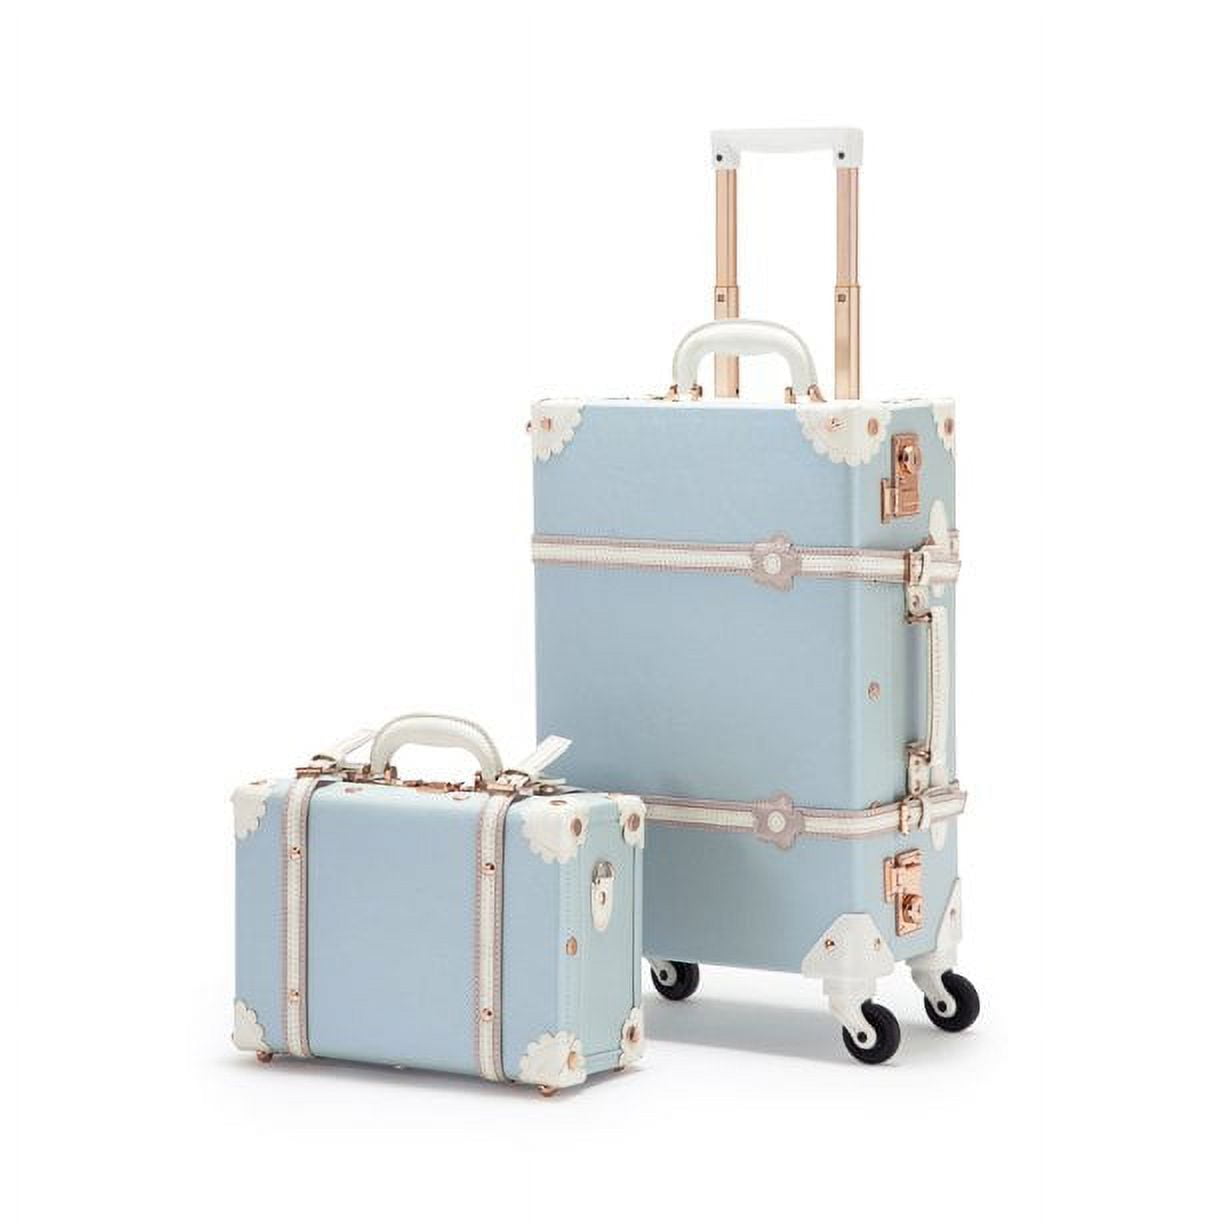 COTRUNKAGE Vintage Carry On Luggage Trunk TSA Lock Spinner Suitcase Set 2  Piece for Women, Cream White